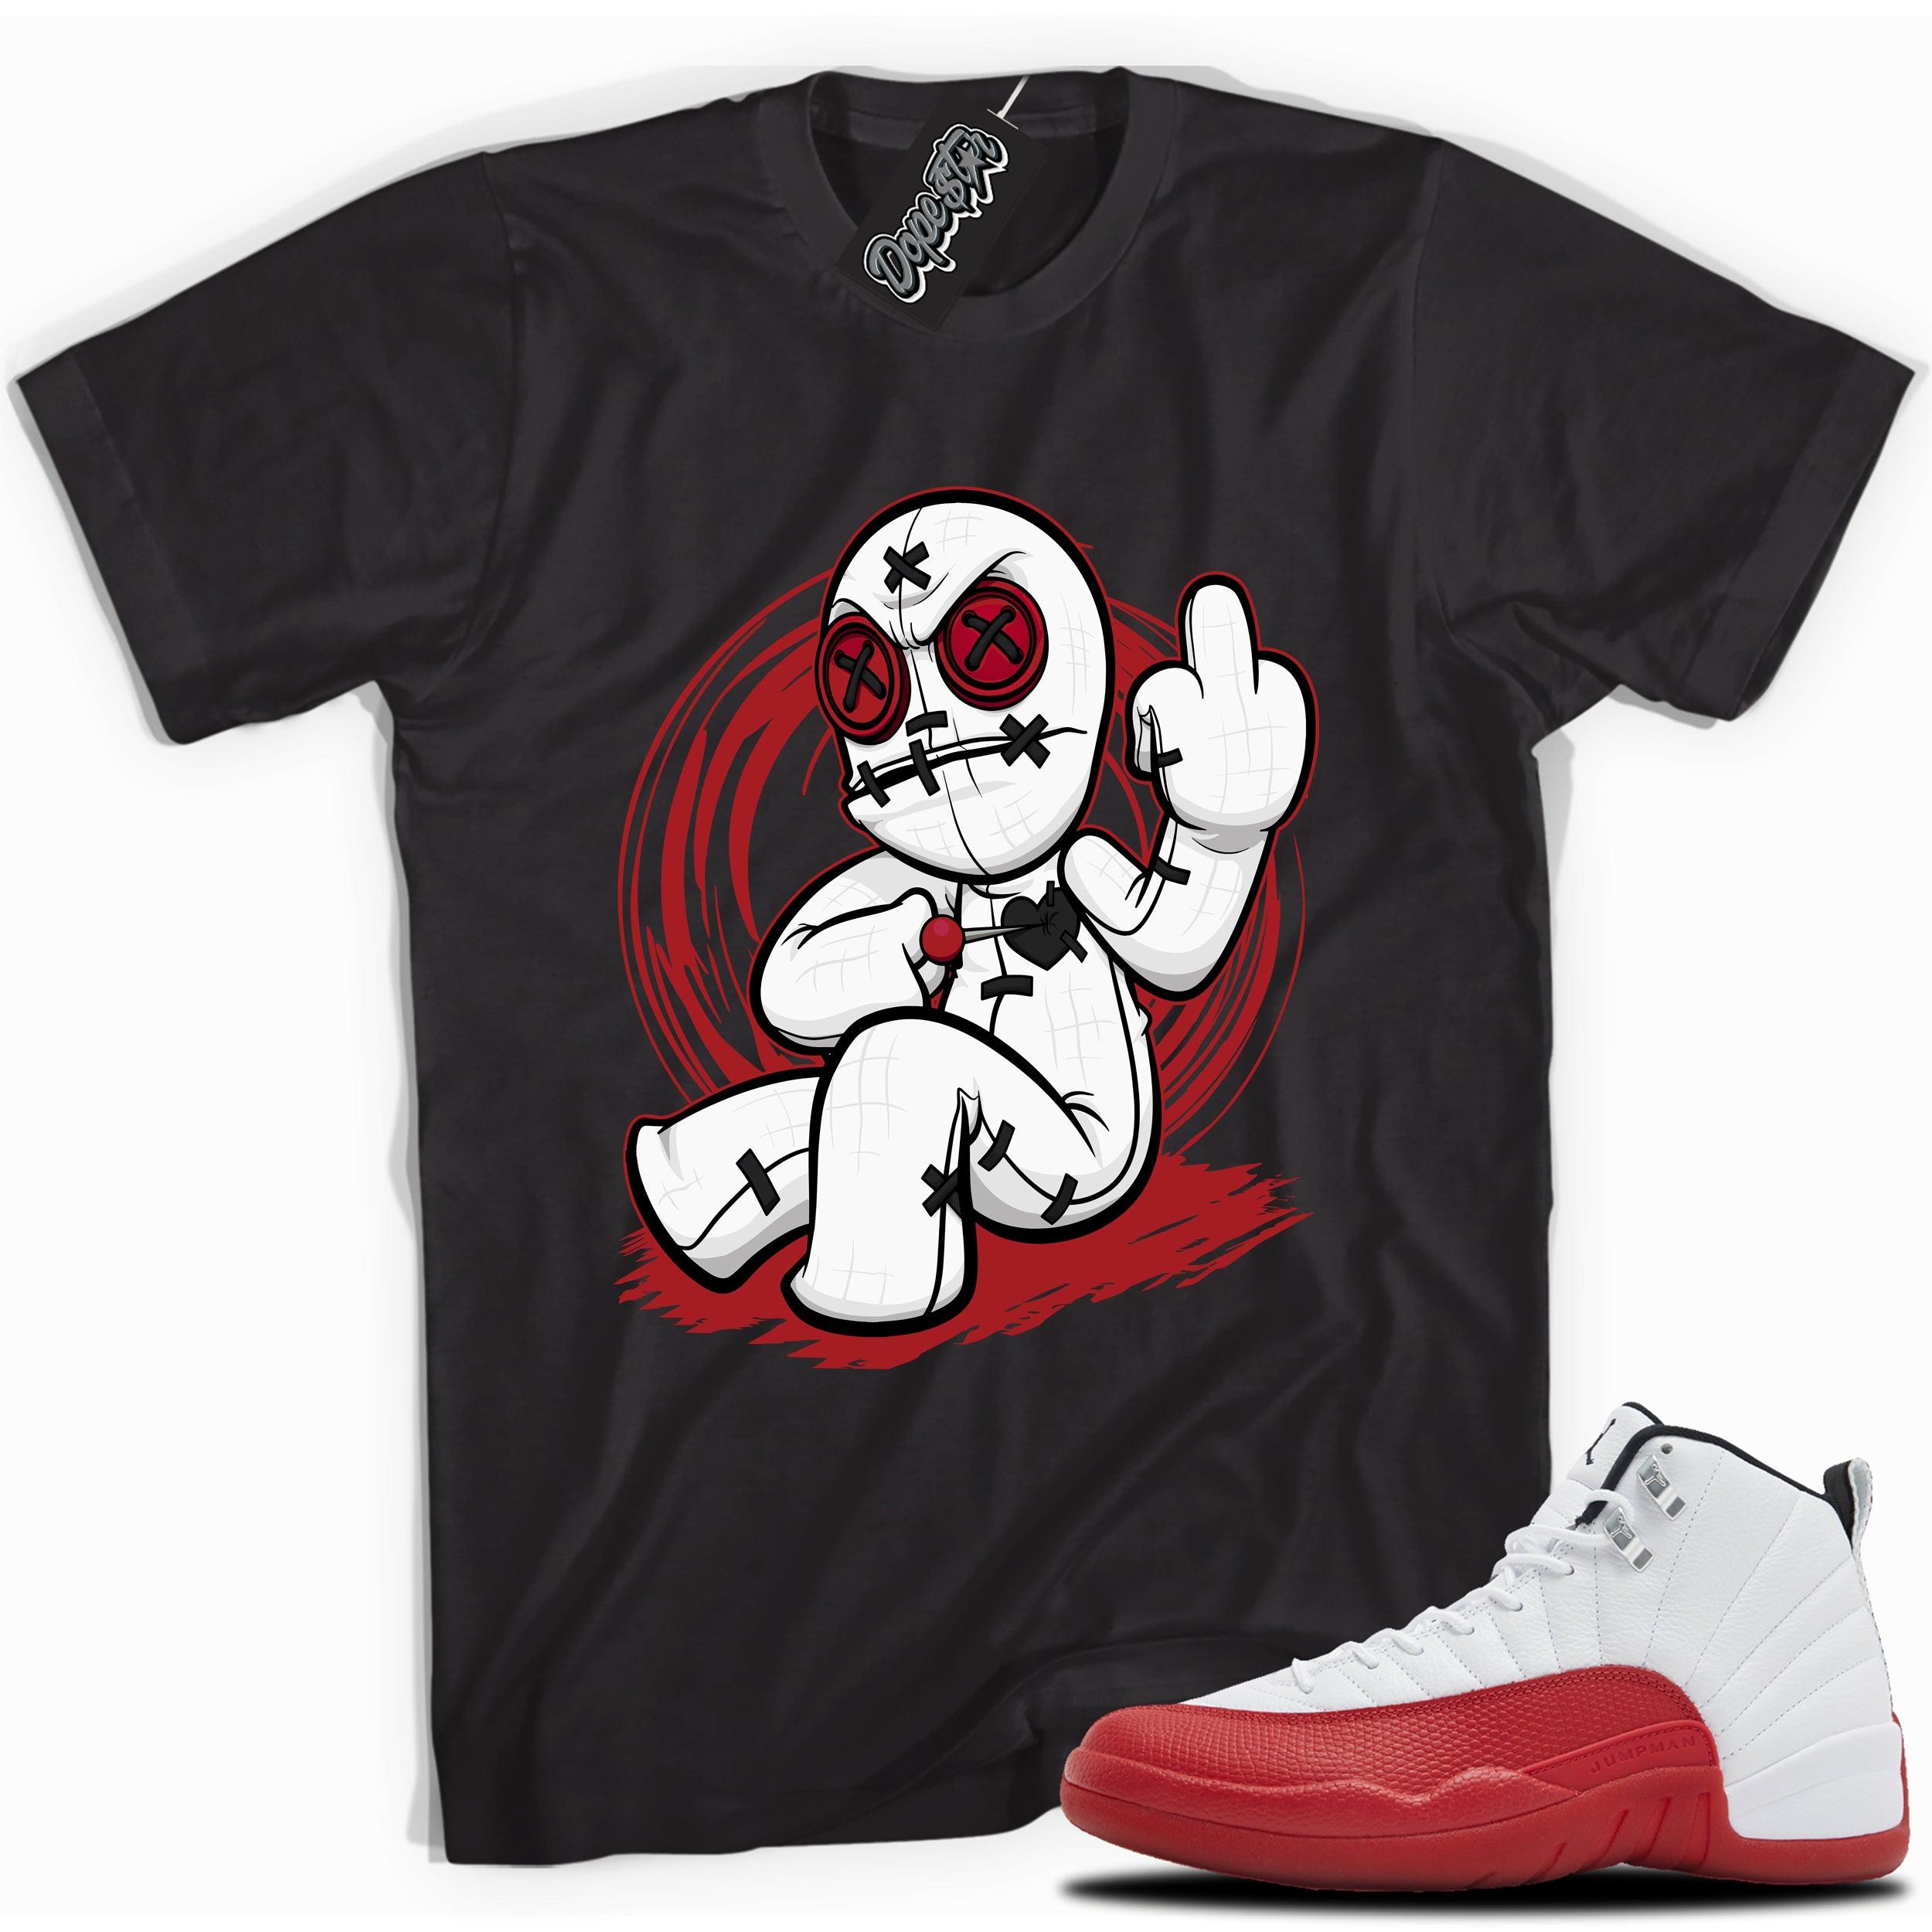 Cool Black graphic tee with “VooDoo Doll” print, that perfectly matches Air Jordan 12 Retro Cherry Red 2023 red and white sneakers 